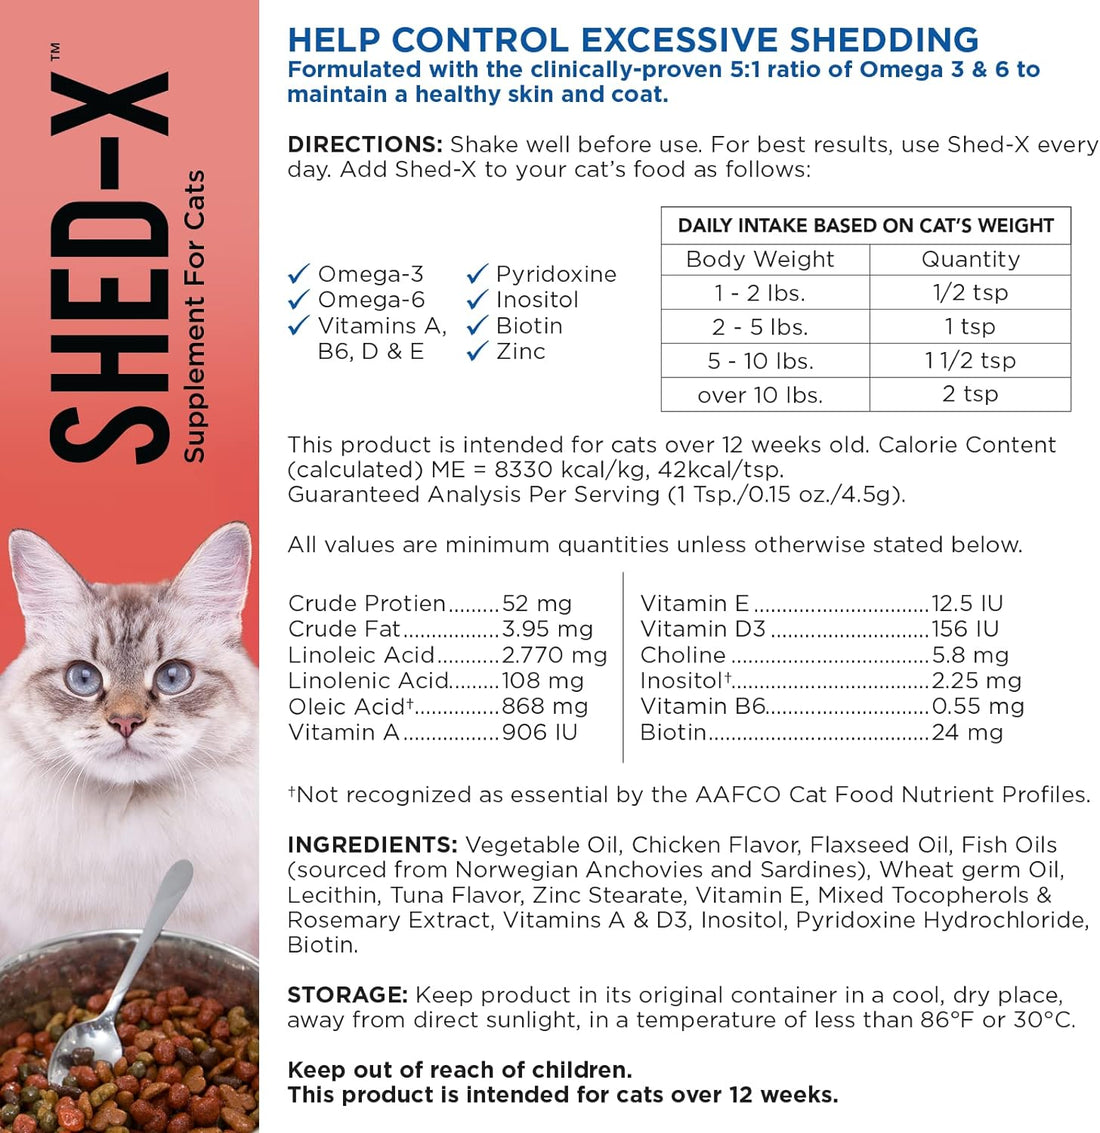 【Synergy Labs】Shed-X Dermaplex Liquid Daily Supplement for Cats - Eliminate Excessive Shedding 8oz